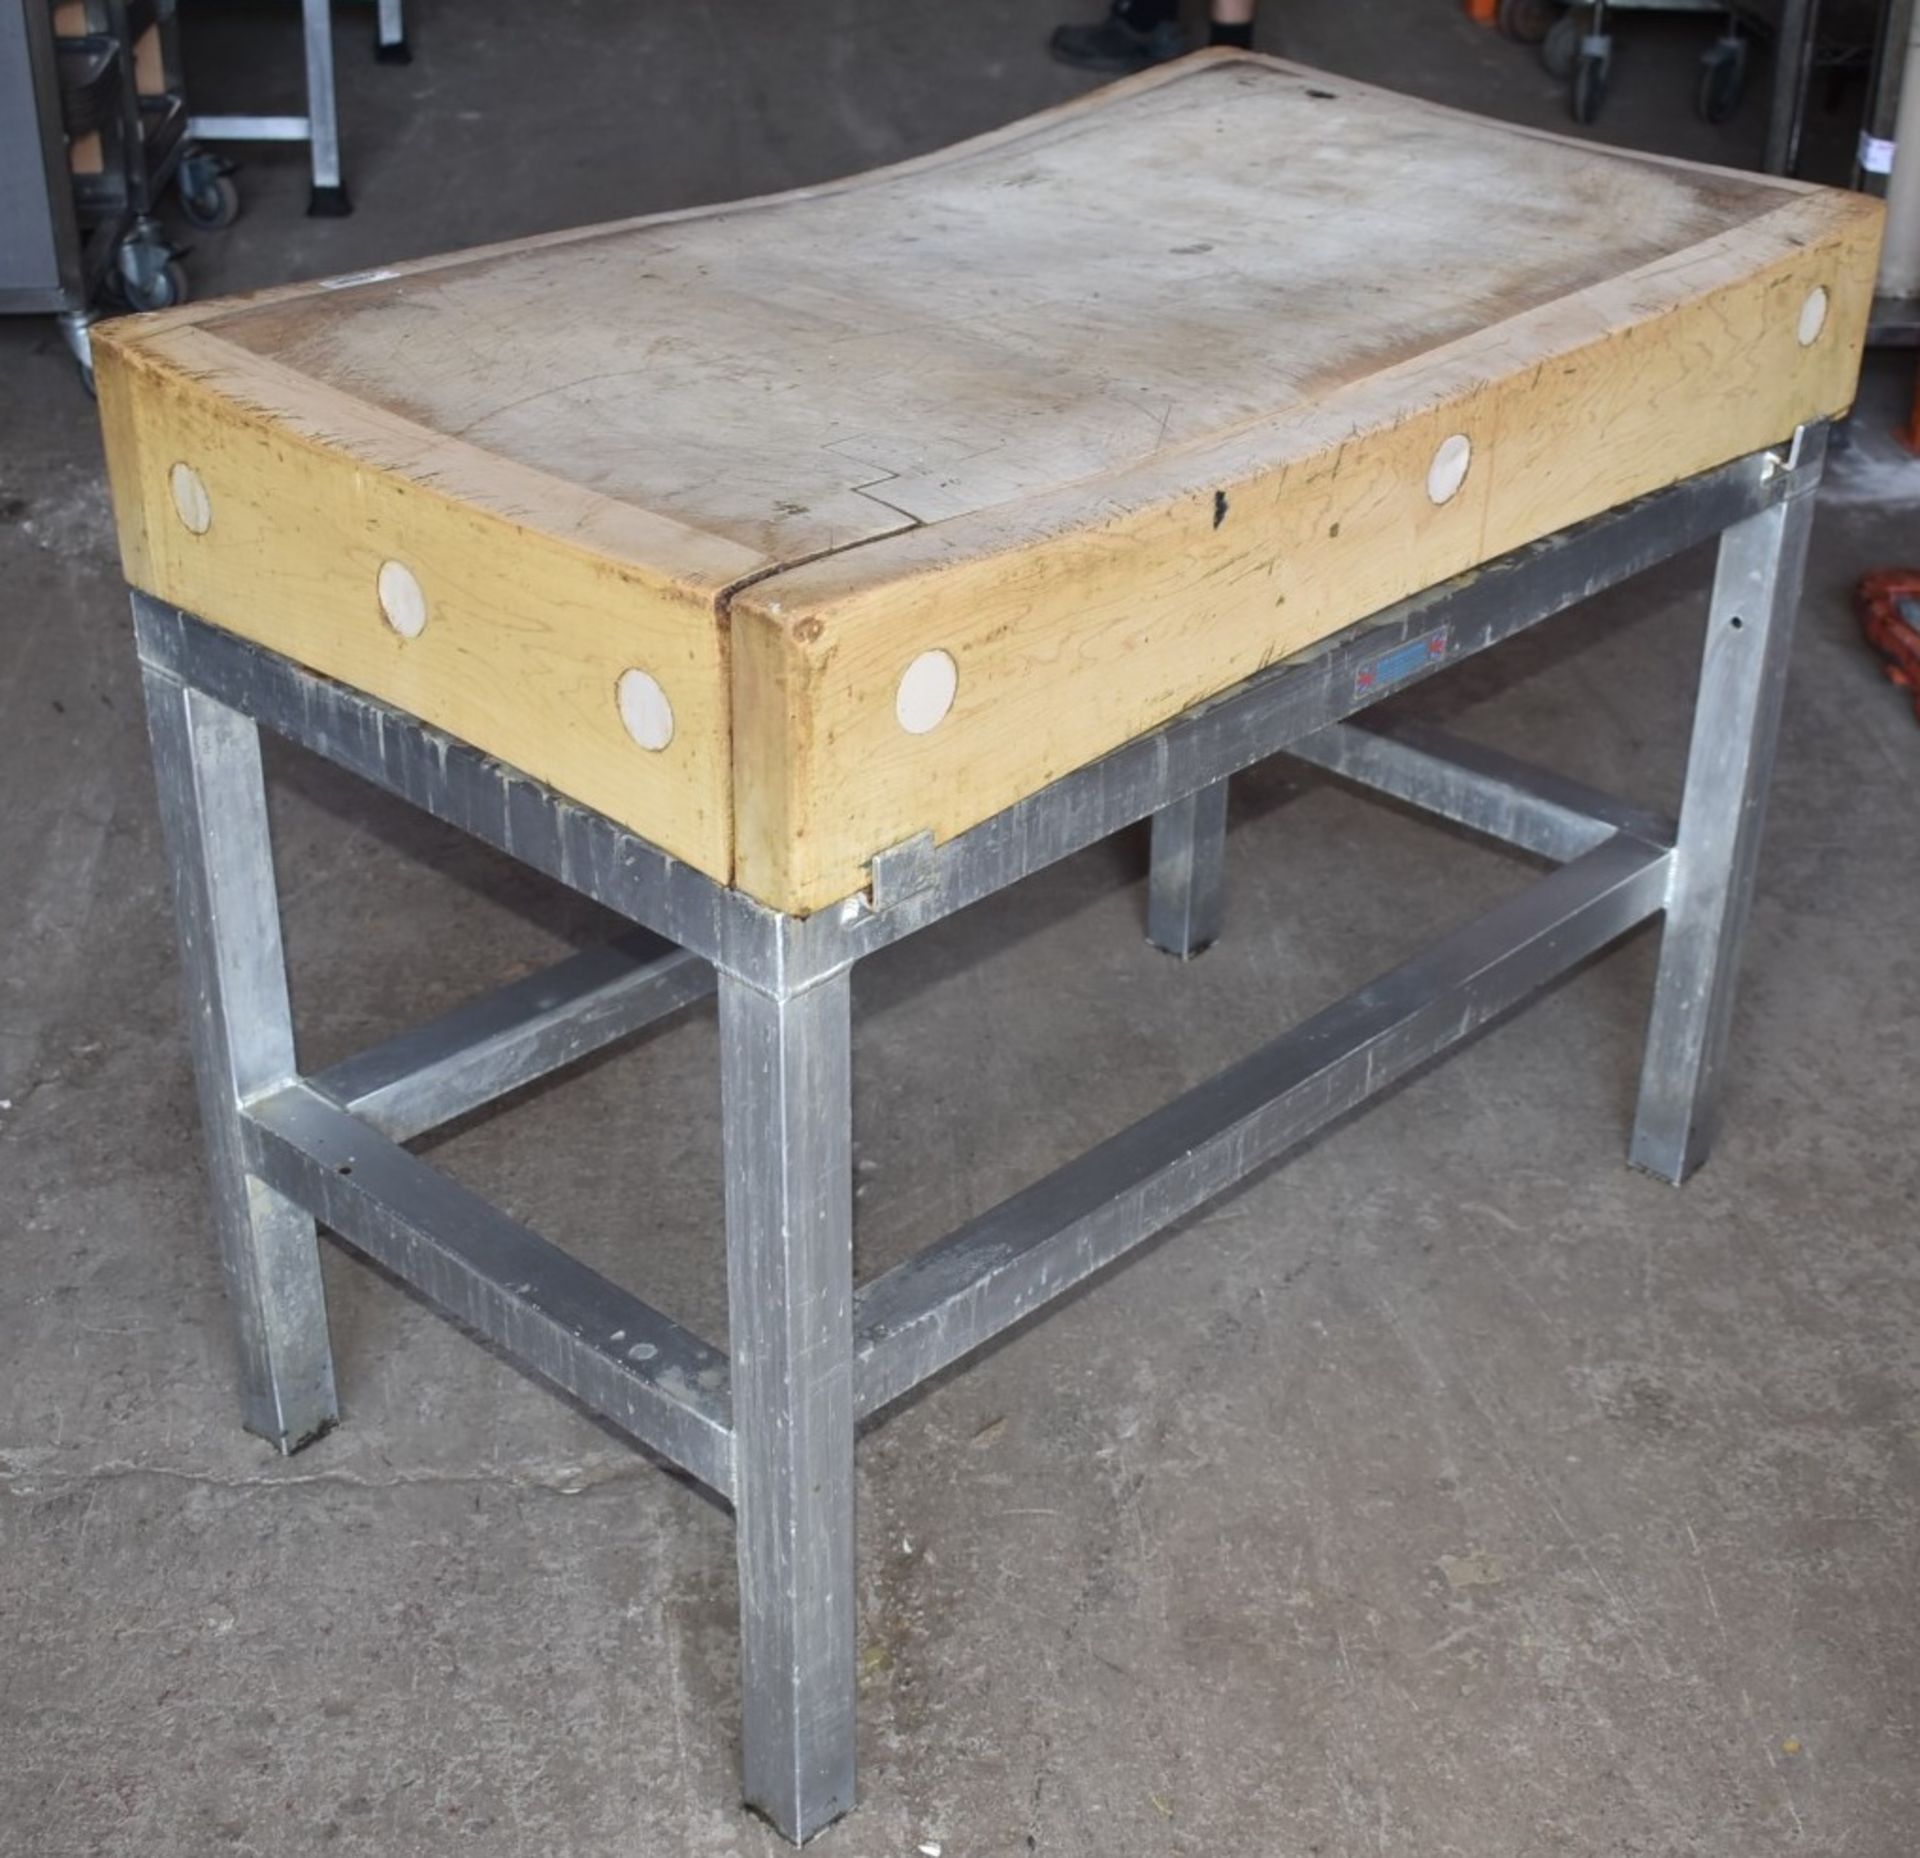 1 x Large Butchers Block Chopping Board on Fabricated Stainless Steel Stand Dimensions: H82 x W107 x - Image 10 of 12